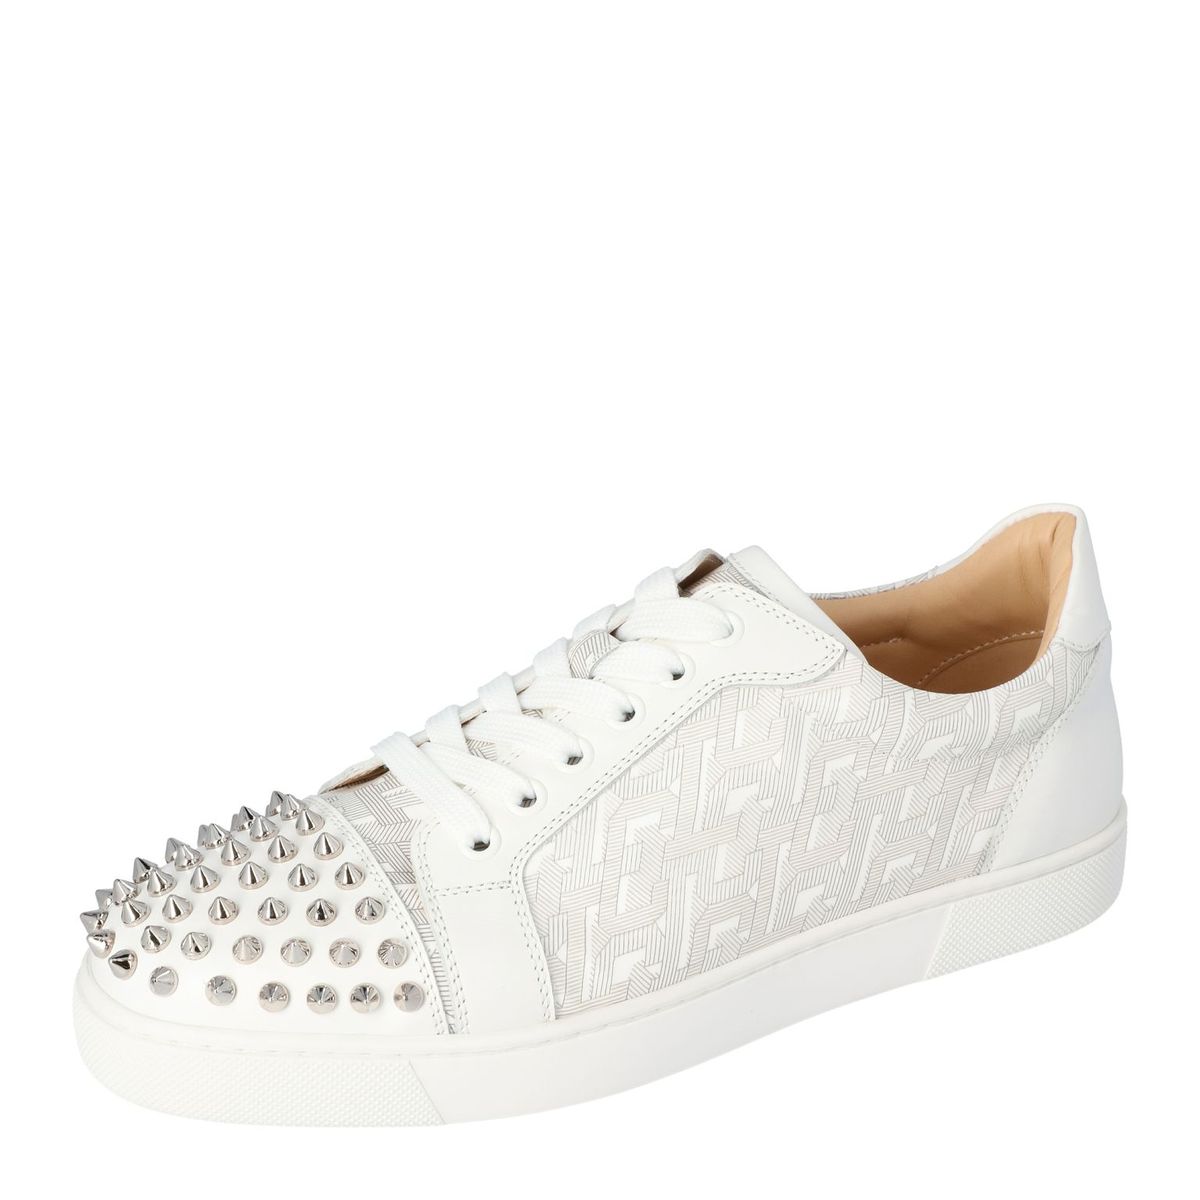 white louboutin sneakers with spikes